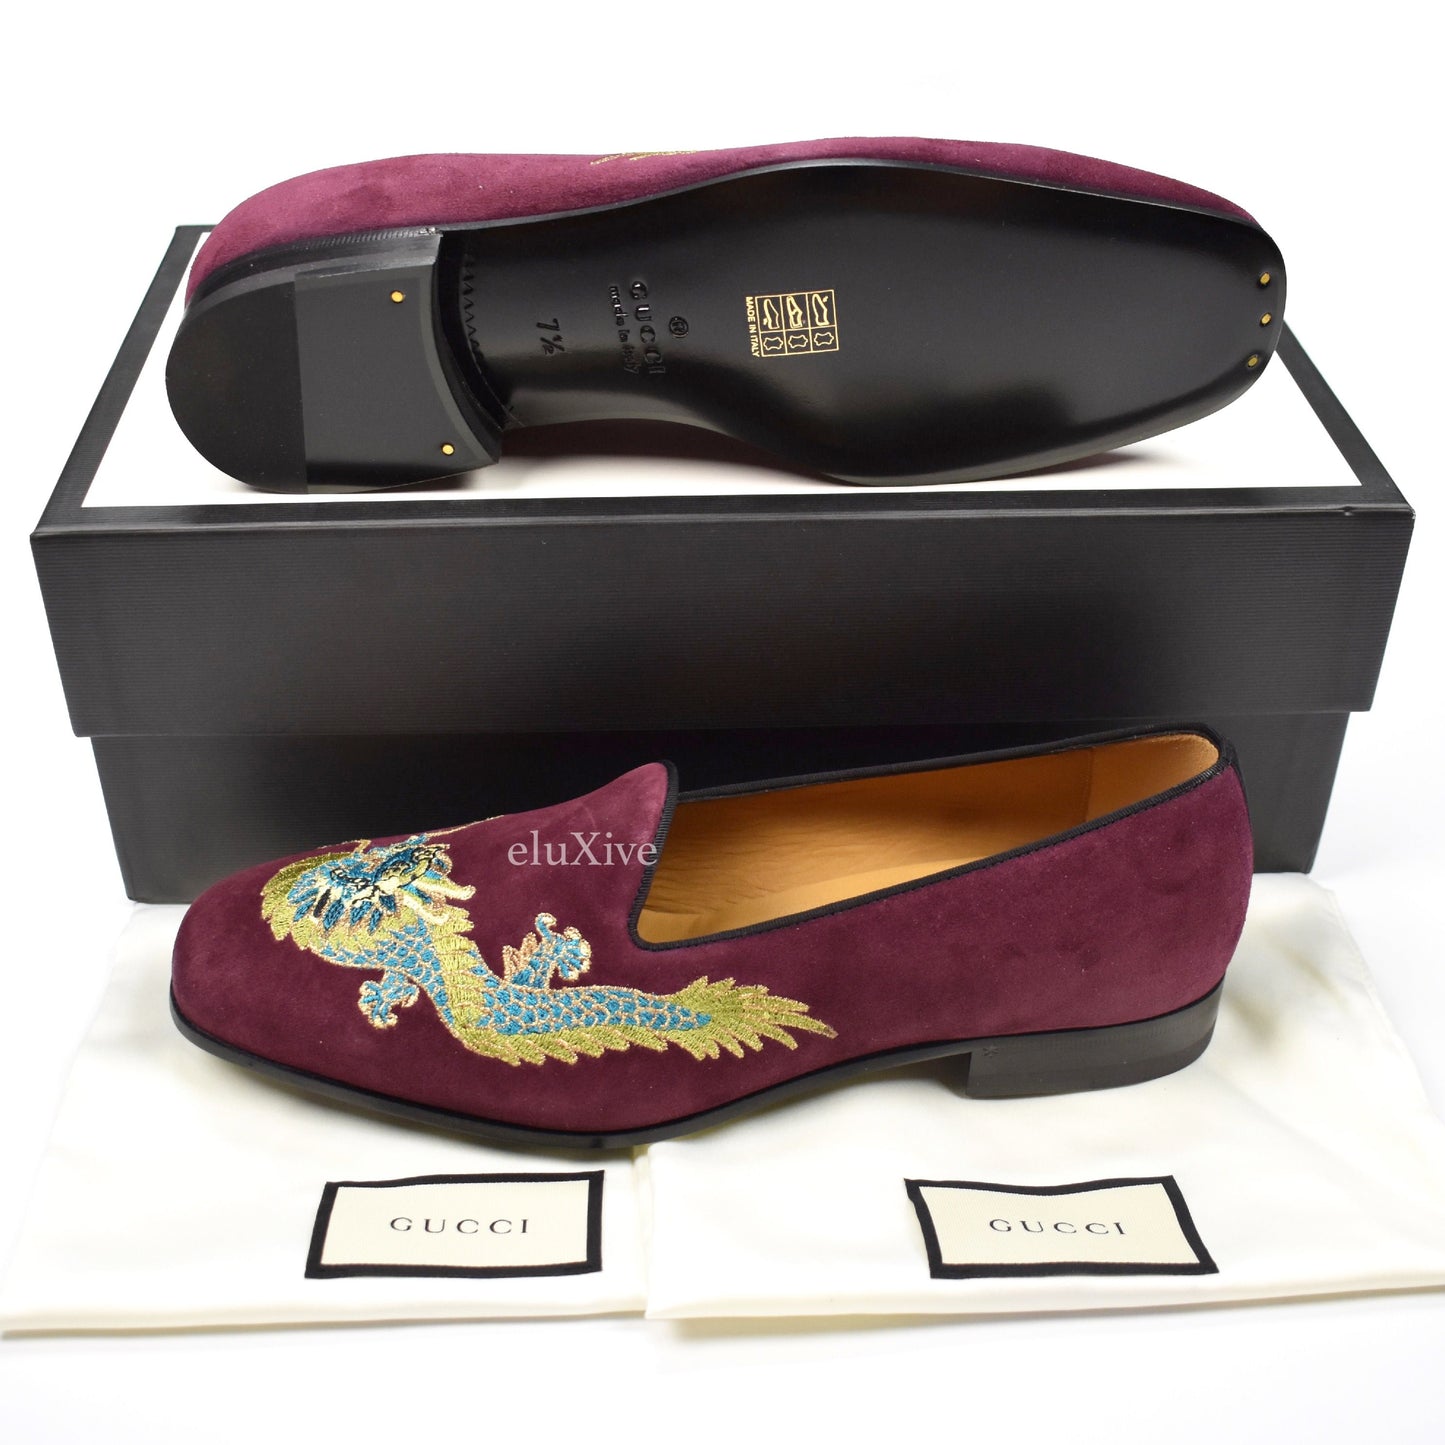 Gucci - Dragon Embroidered Suede Loafers